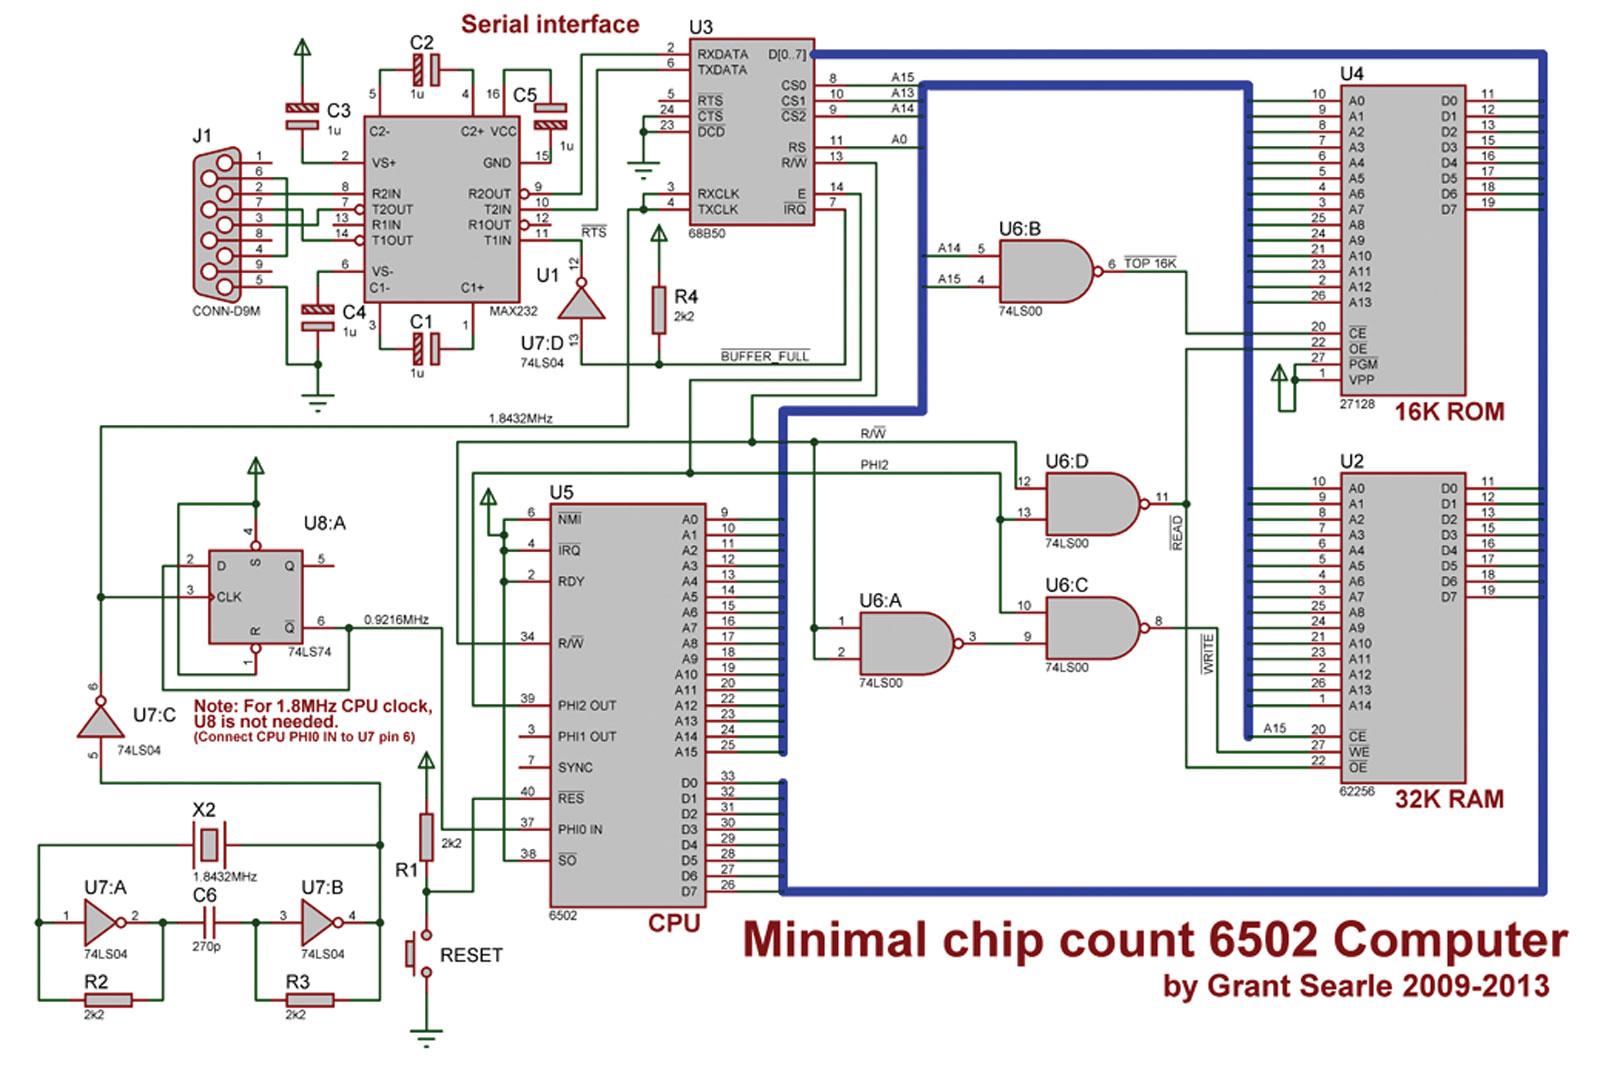 Minimal chip count 6502 computer.